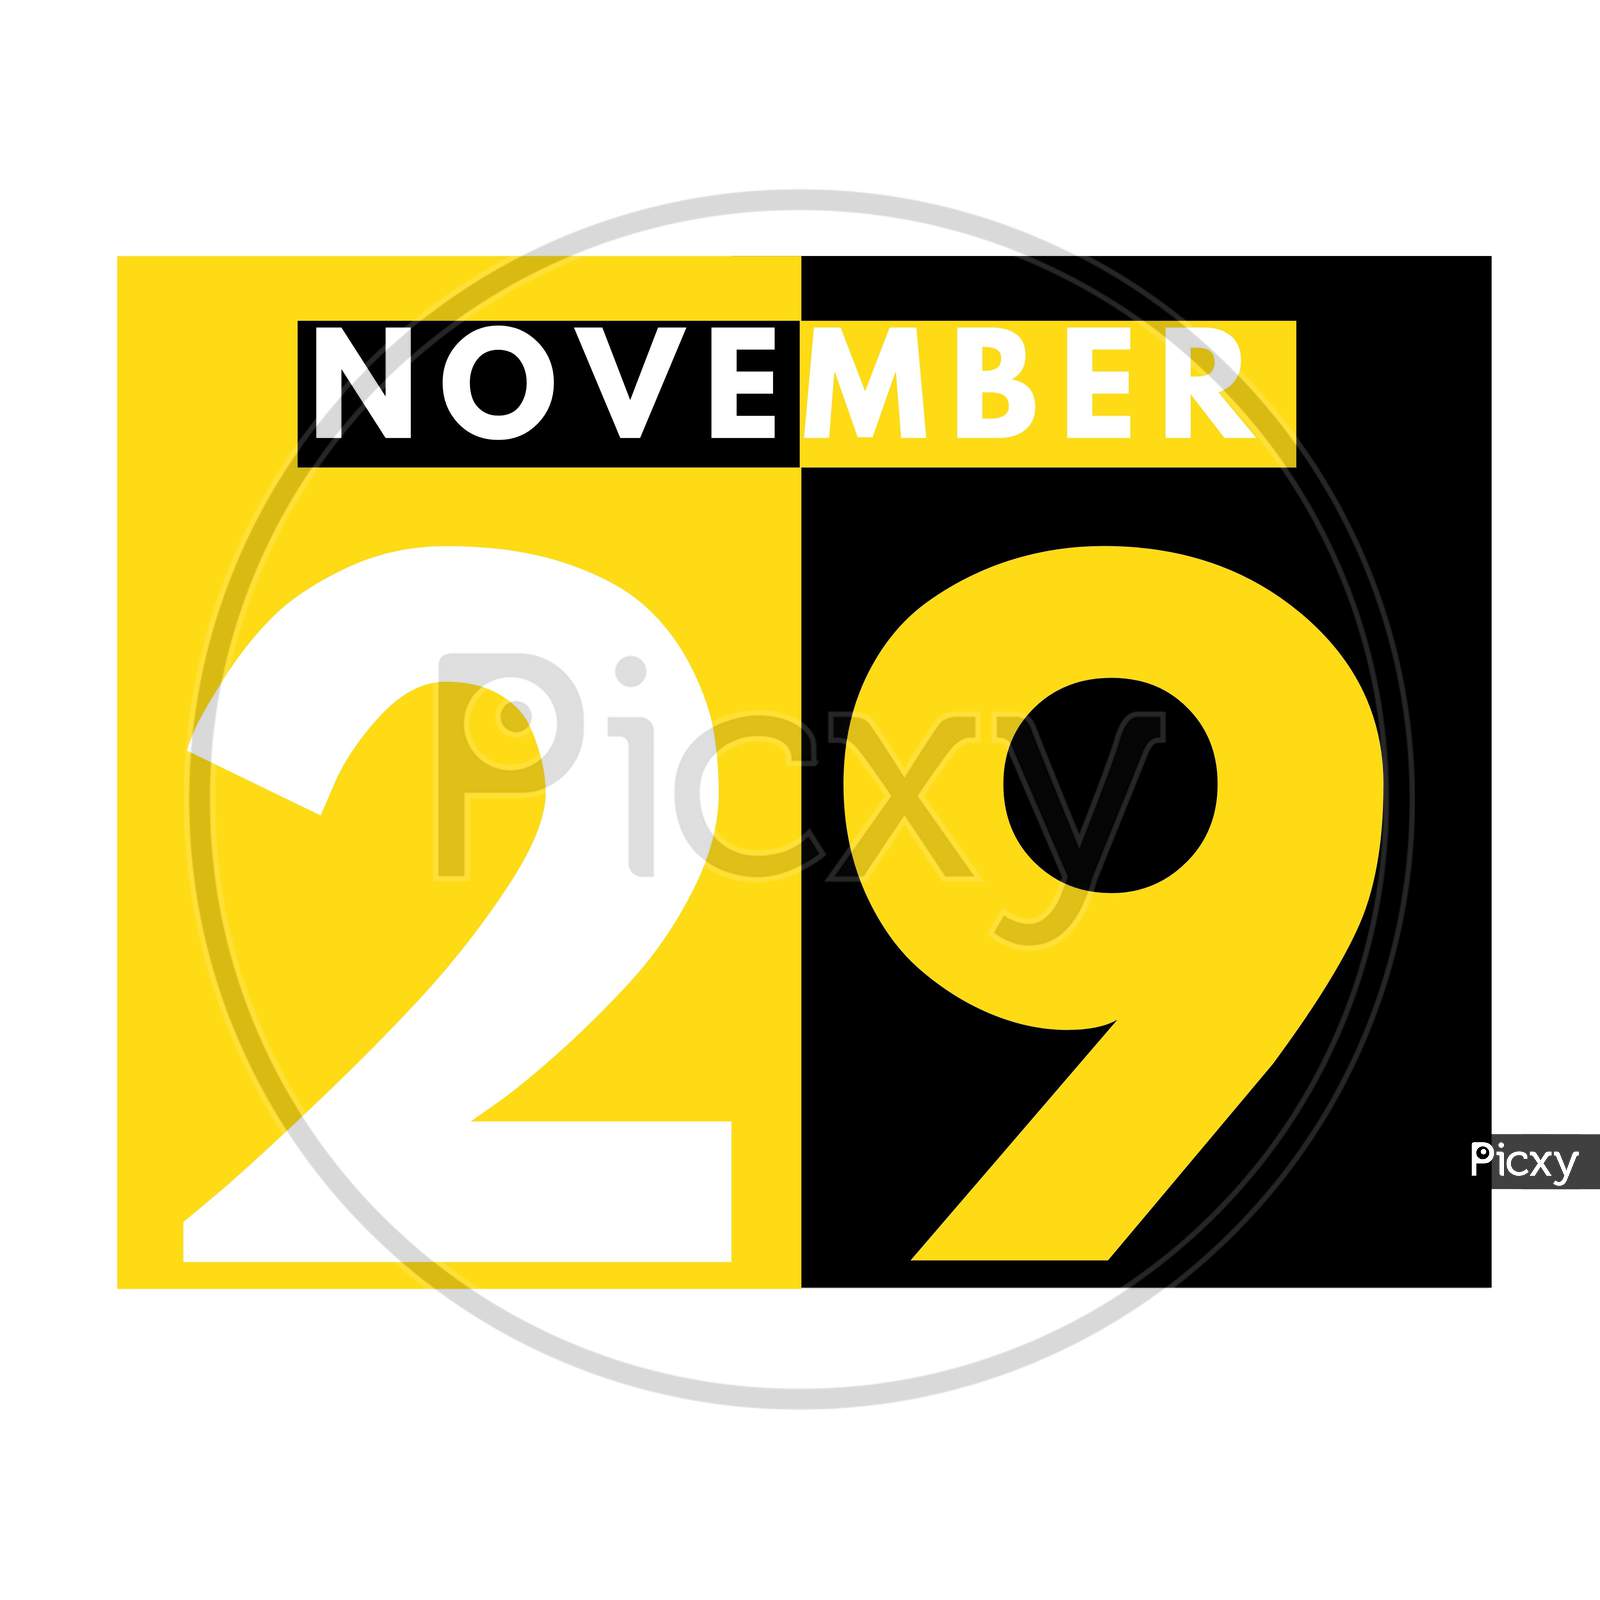 November 29 . Modern Daily Calendar Icon .Date ,Day, Month .Calendar For The Month Of November